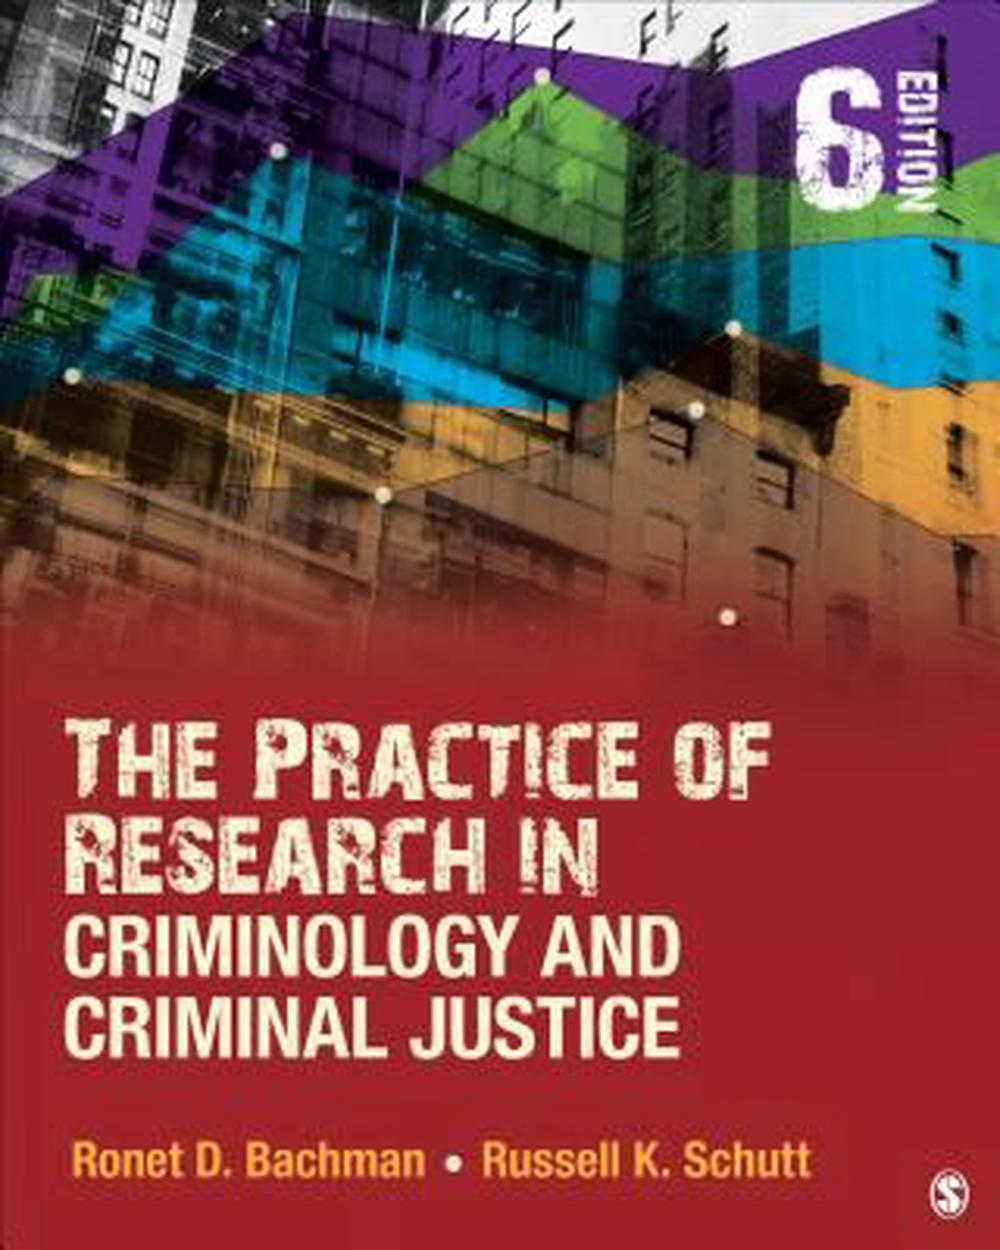 criminal justice best topic in criminology thesis